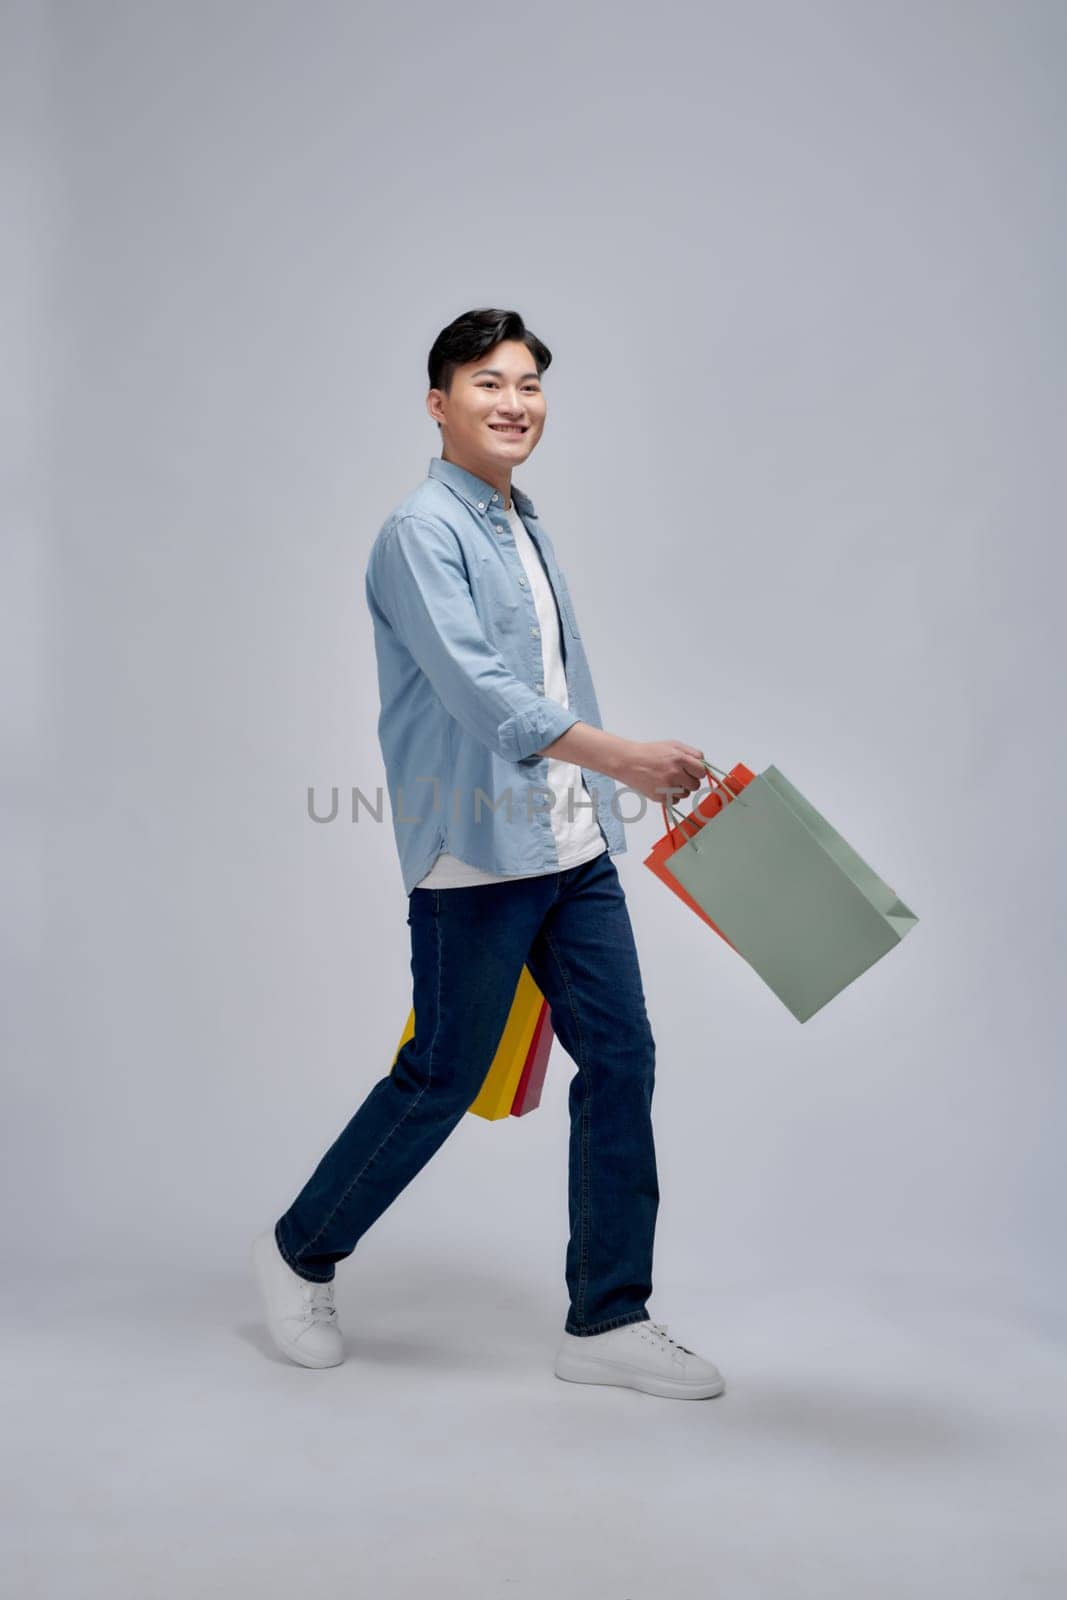 Young positive man hold bags from shopping store advert satisfied by makidotvn